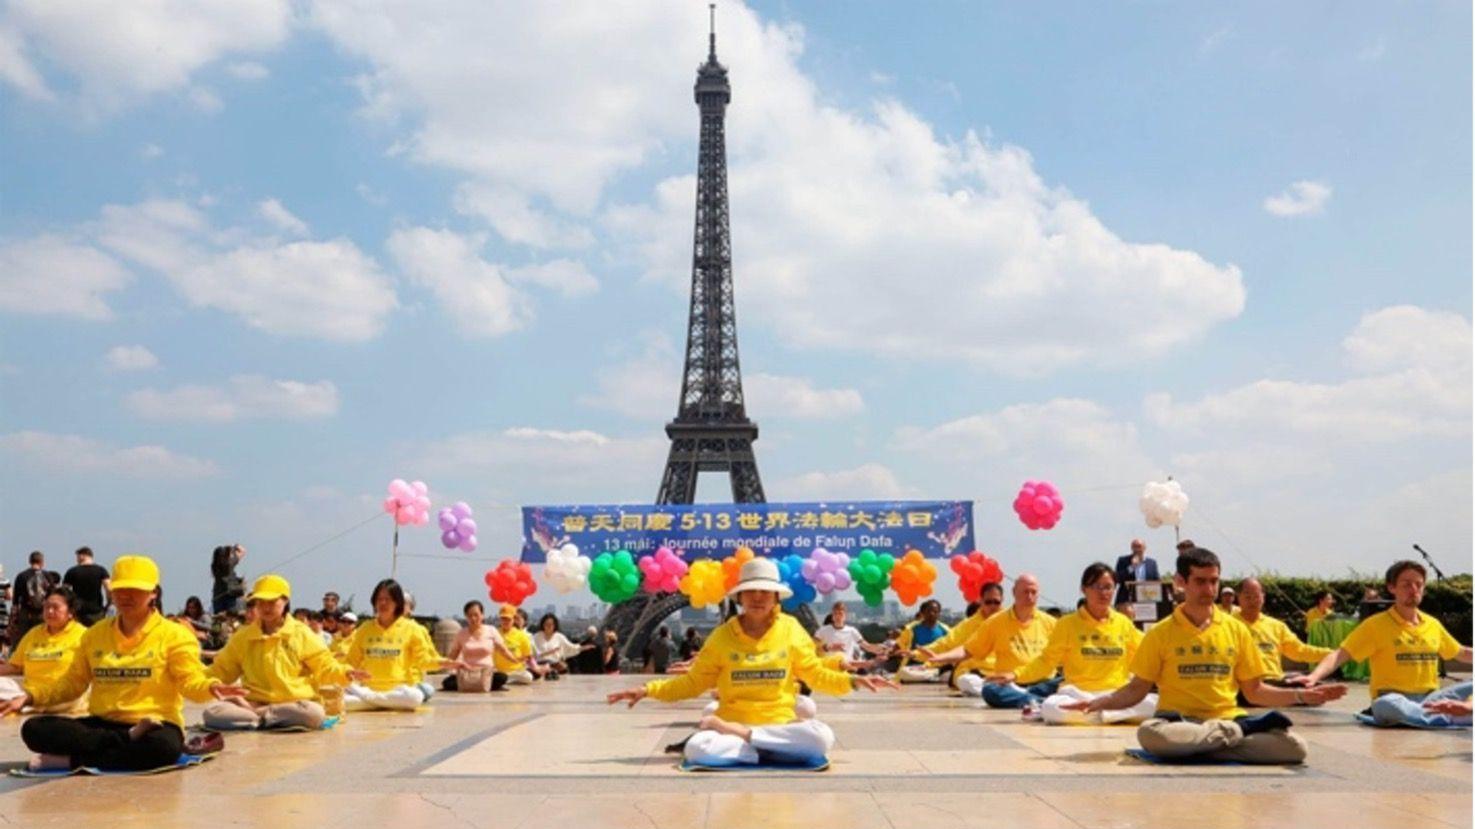 Falun Gong practitioners in Paris gather to meditate in front of the Eiffel Tower.